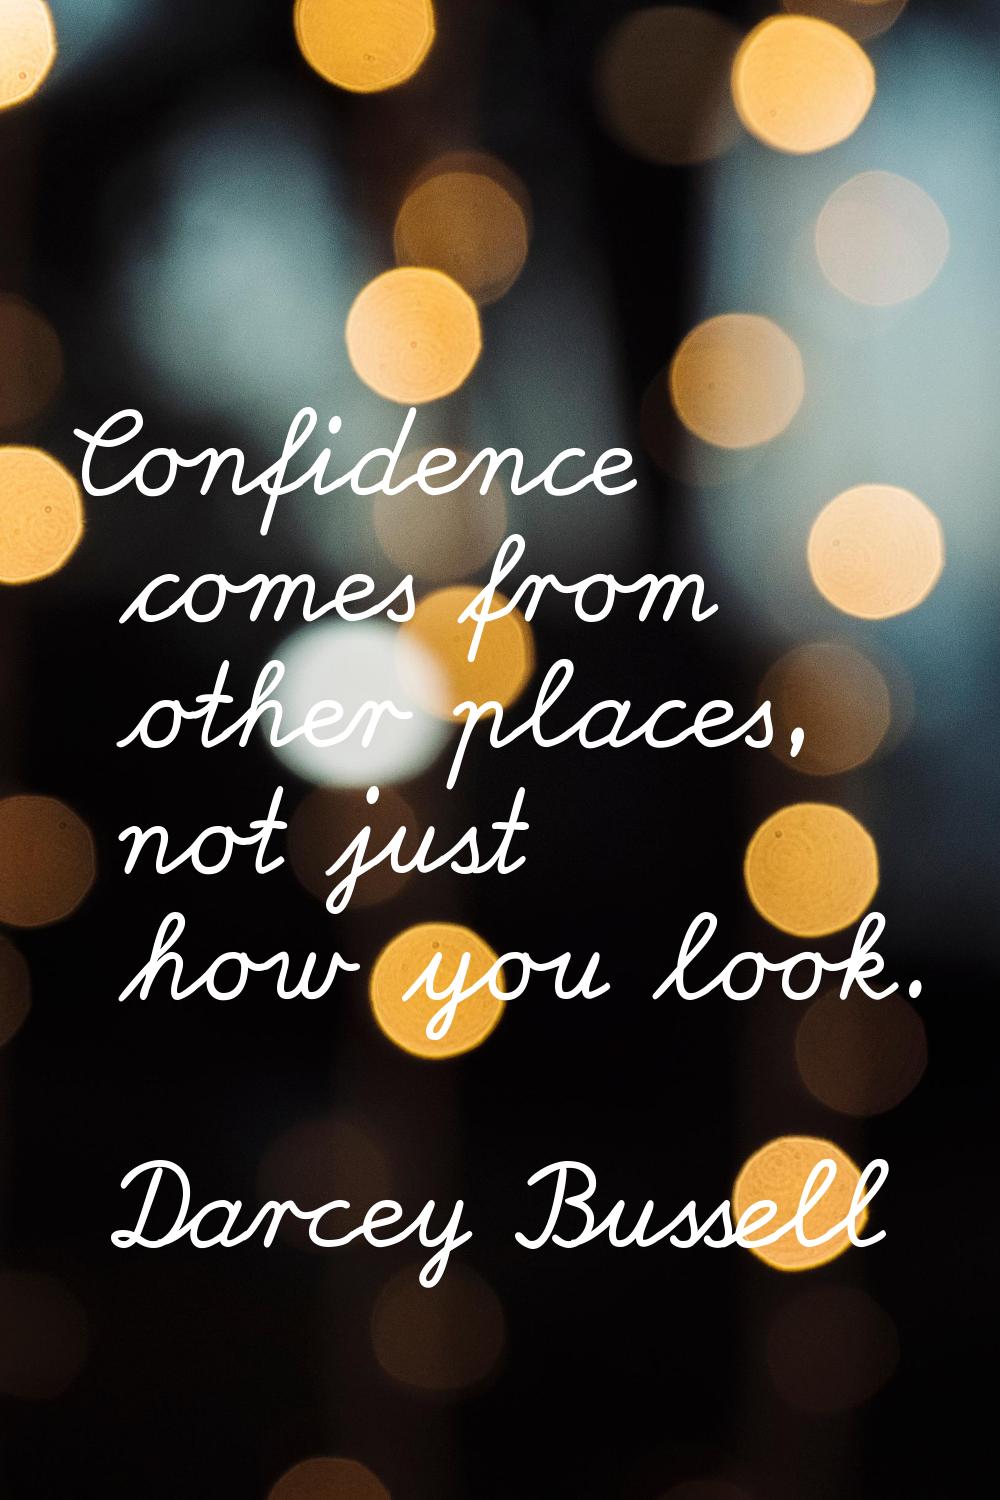 Confidence comes from other places, not just how you look.